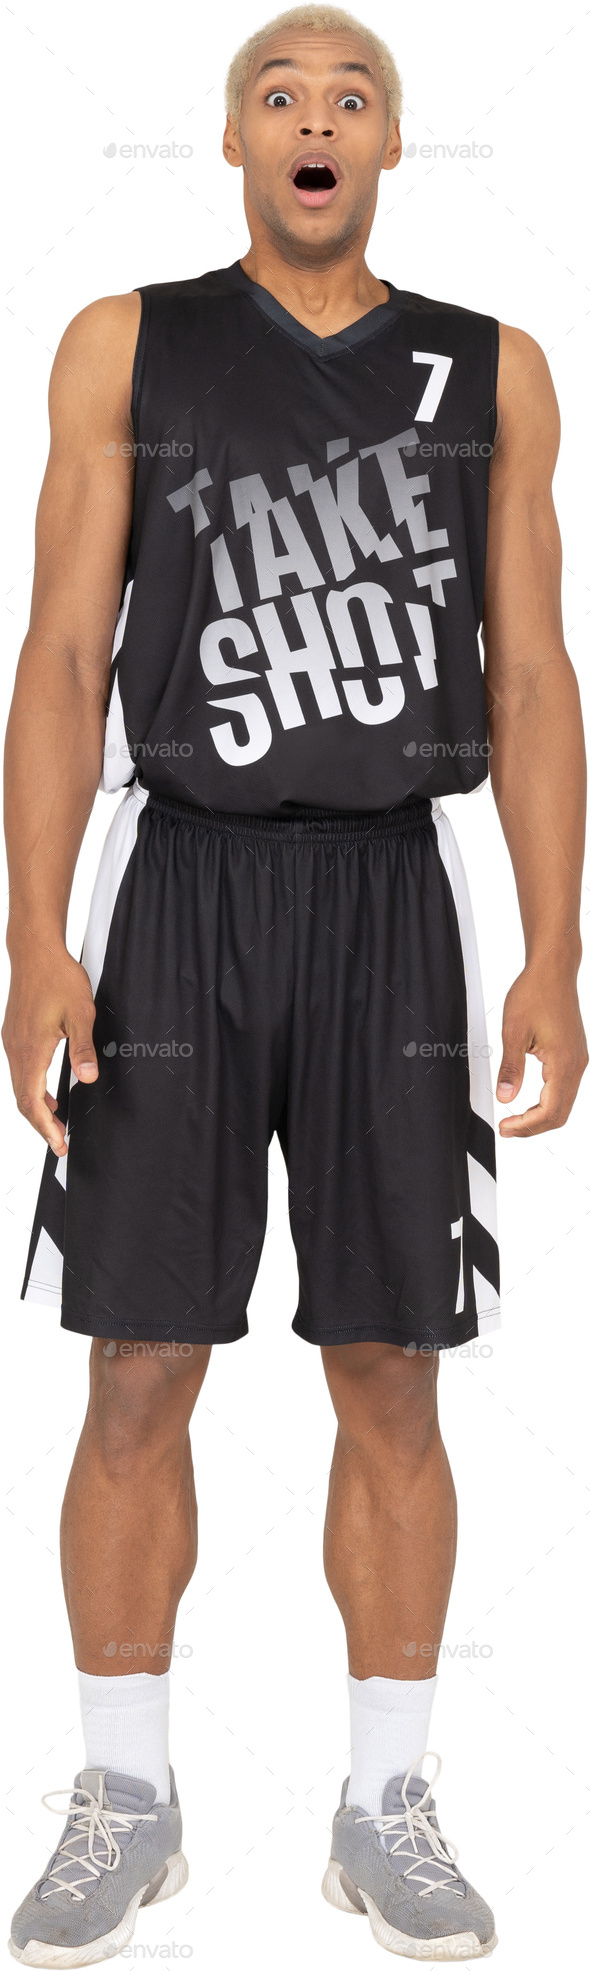 a man wearing black and white basketball shorts and a tank top